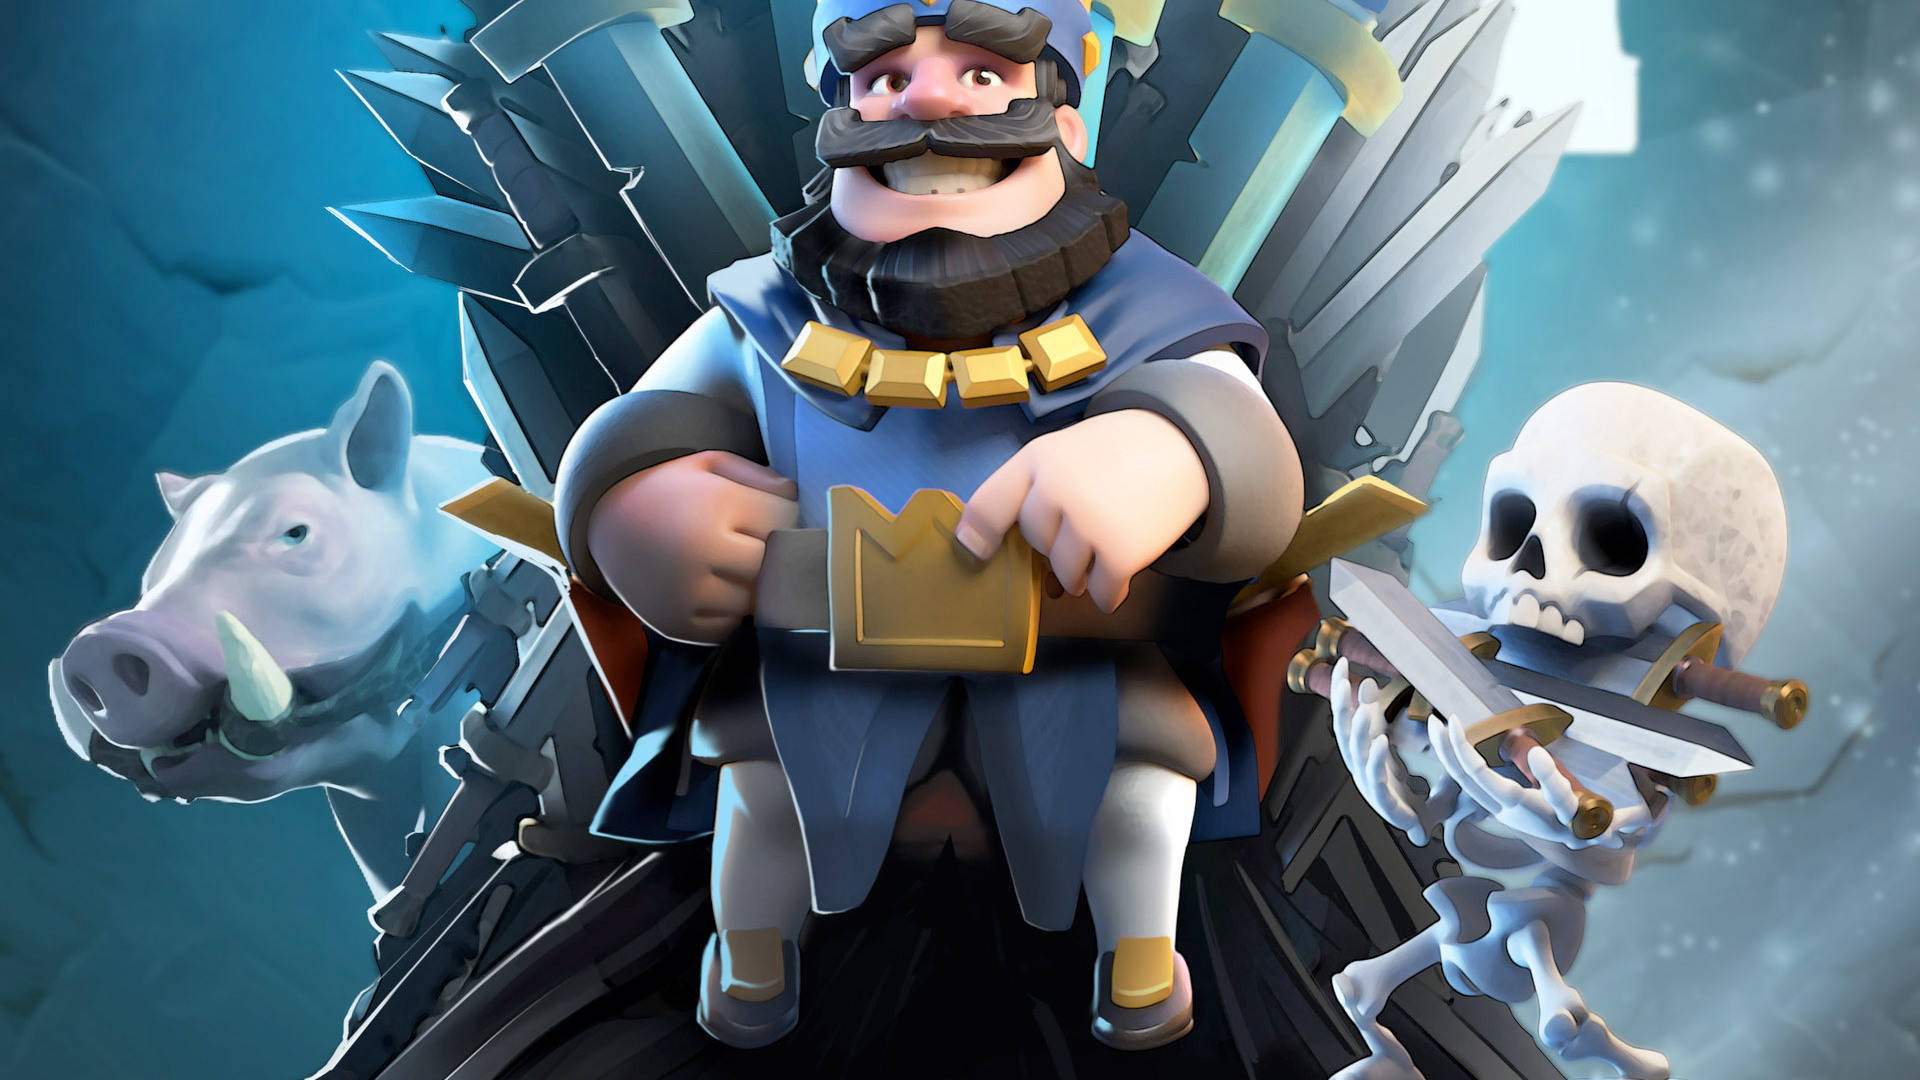 Top 999+ Clash Royale Wallpaper Full HD, 4K✅Free to Use